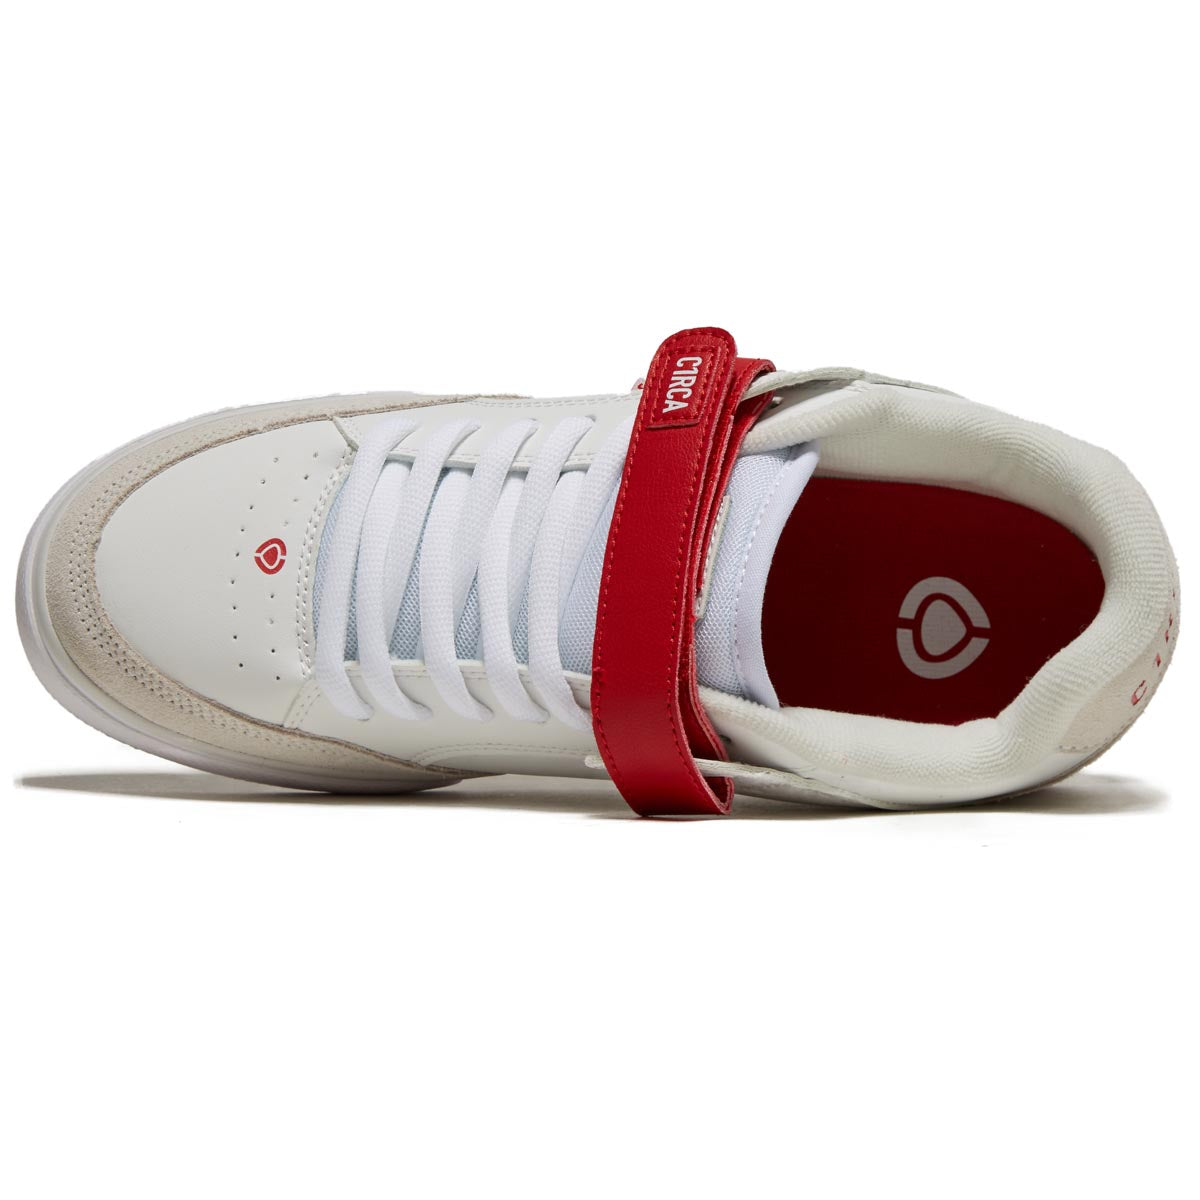 C1rca 205 Vulc Shoes - White/Red image 3